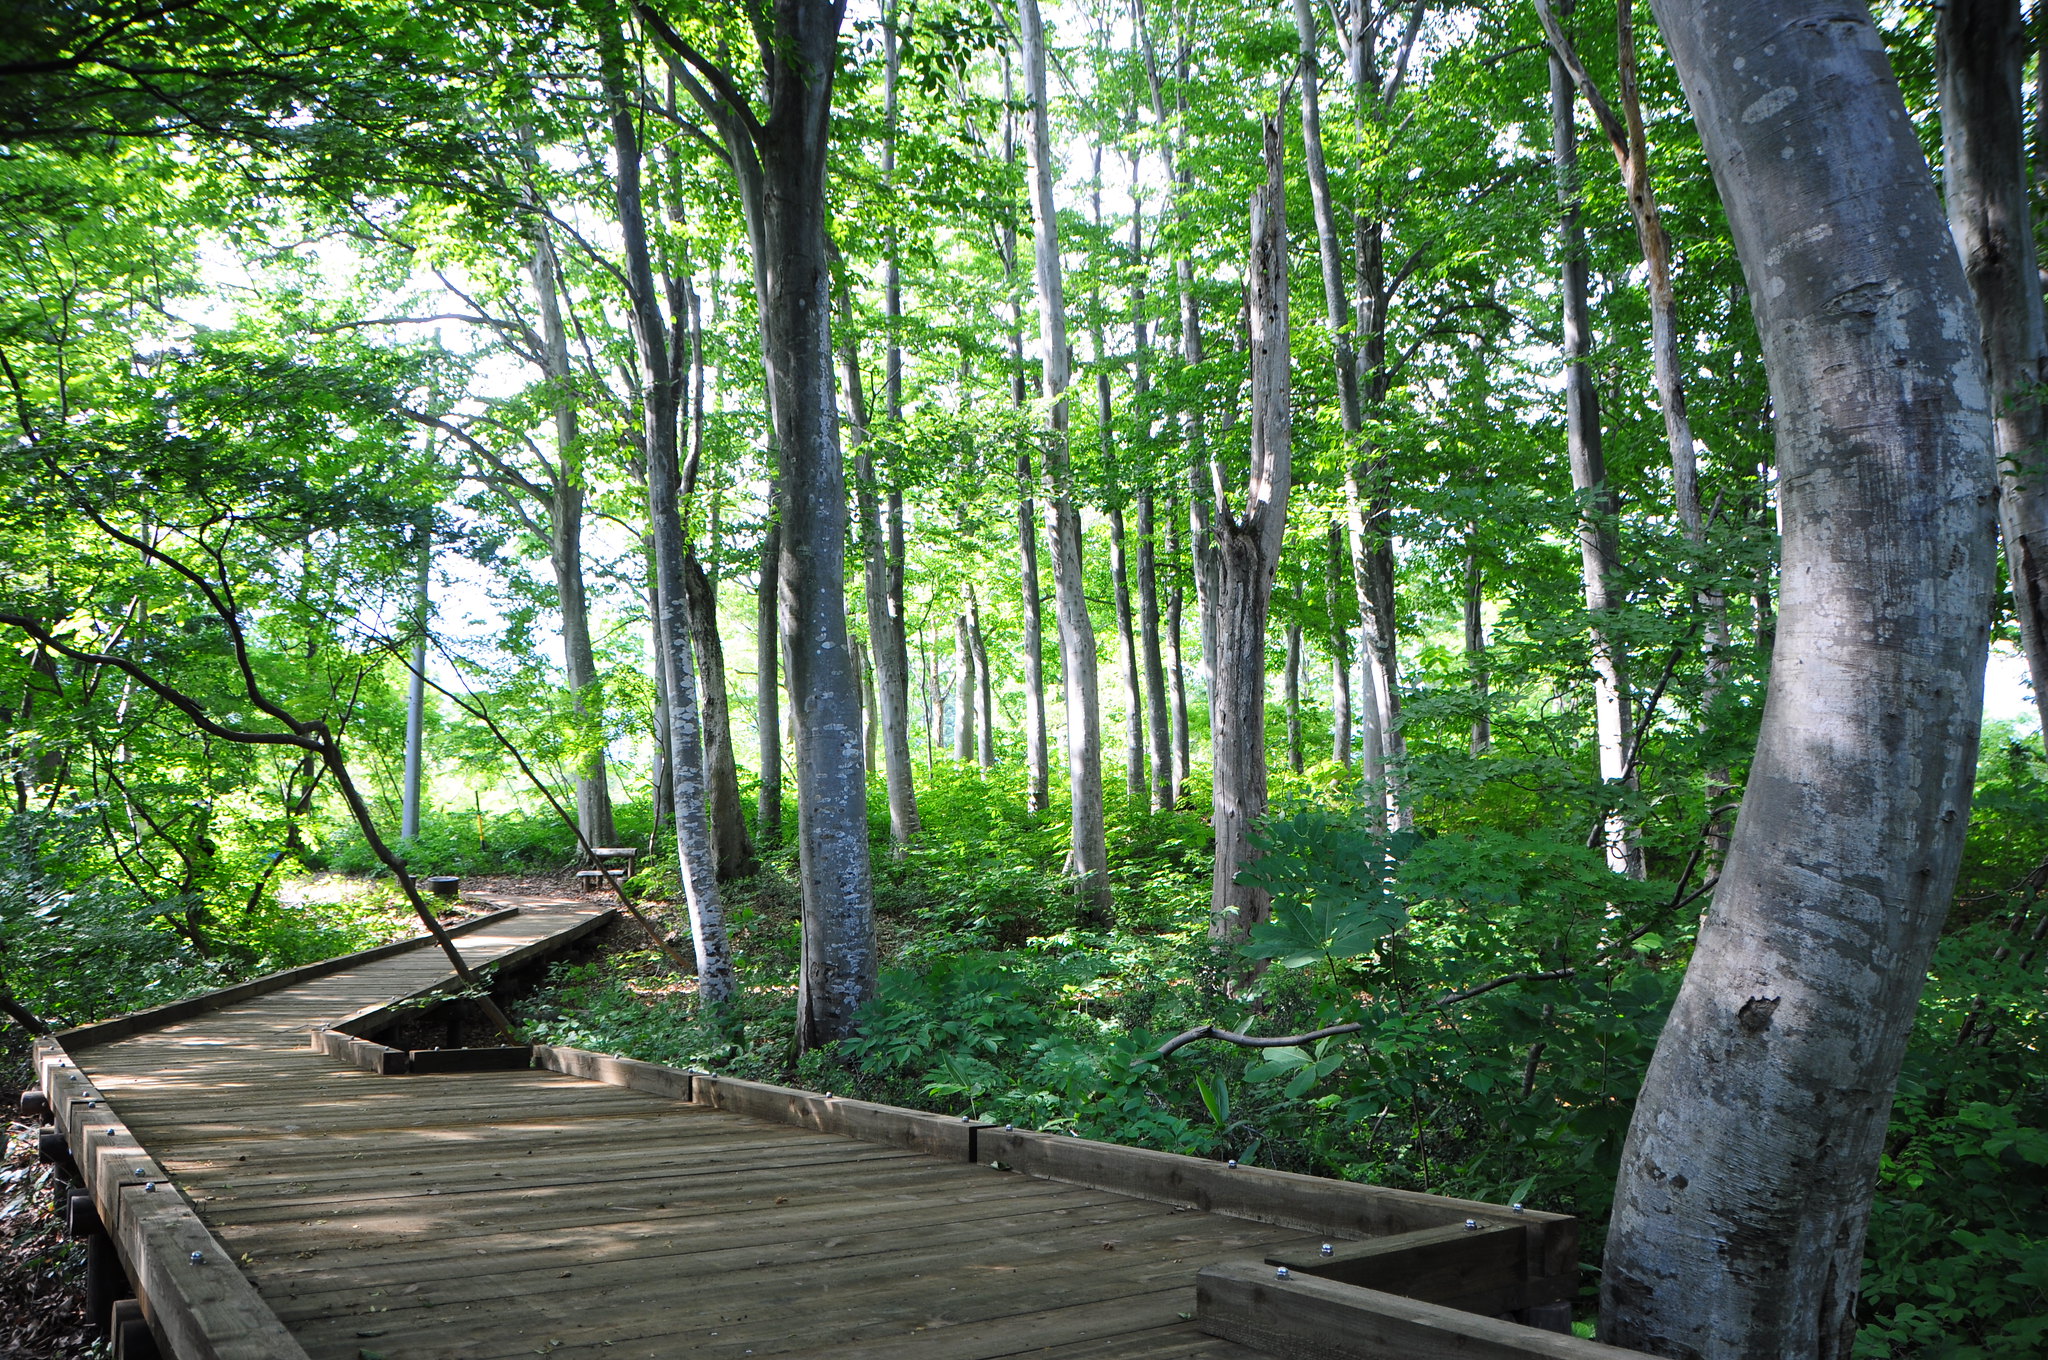 A wooden boardwalk meanders through a forest of beech trees